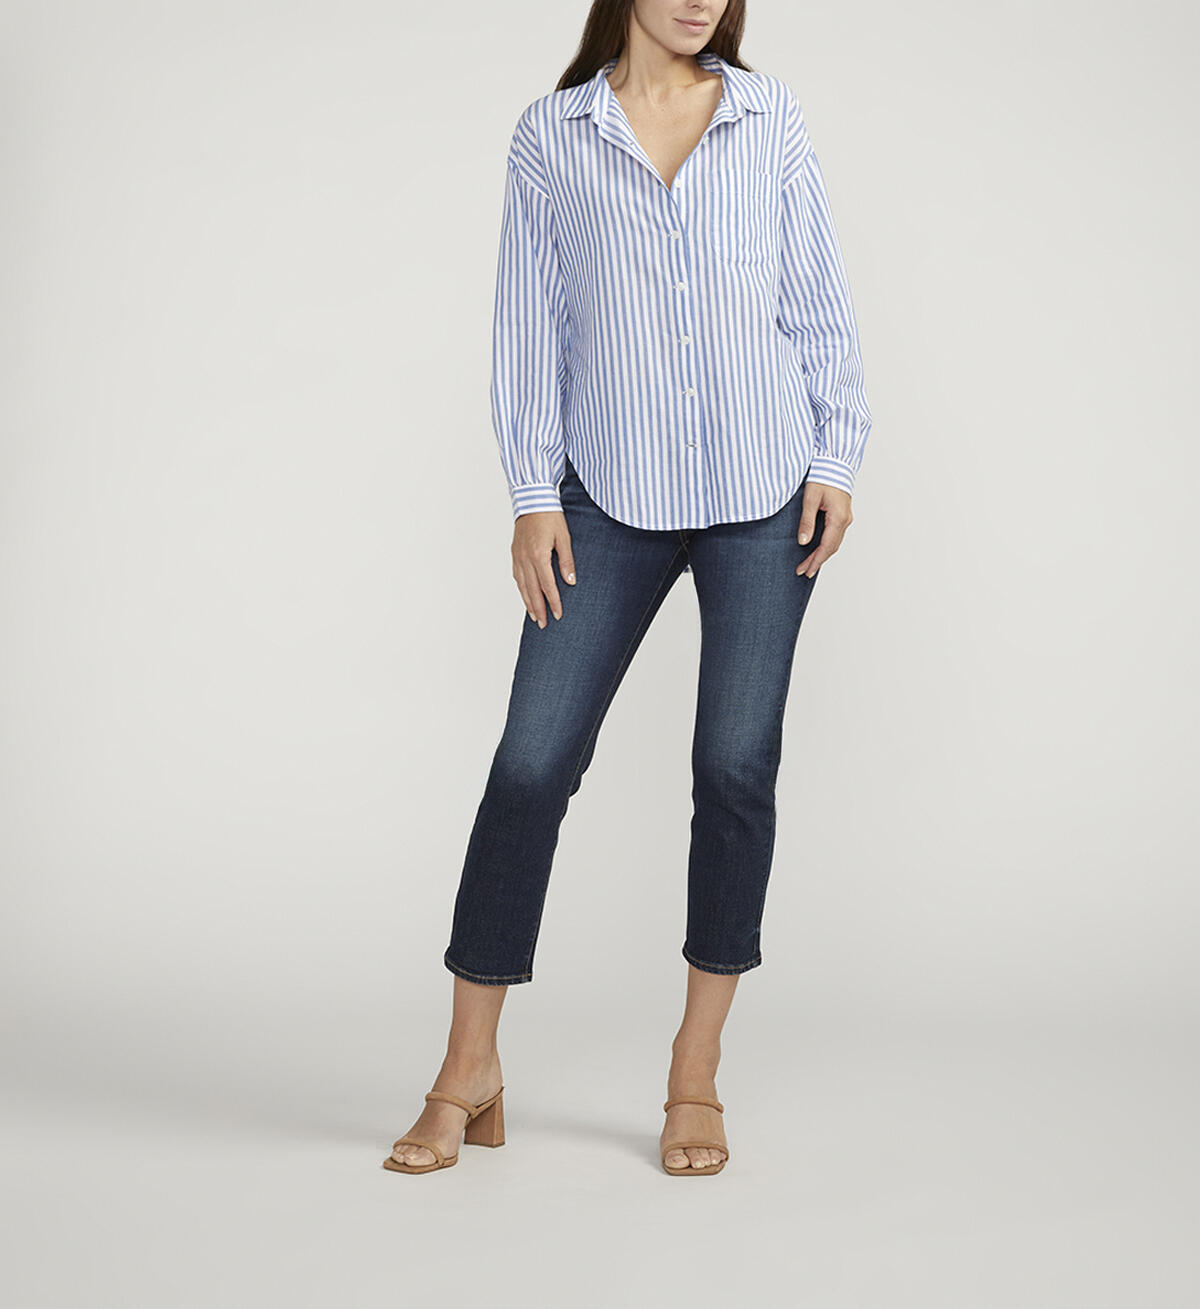 Relaxed Button-Down Shirt, , hi-res image number 2